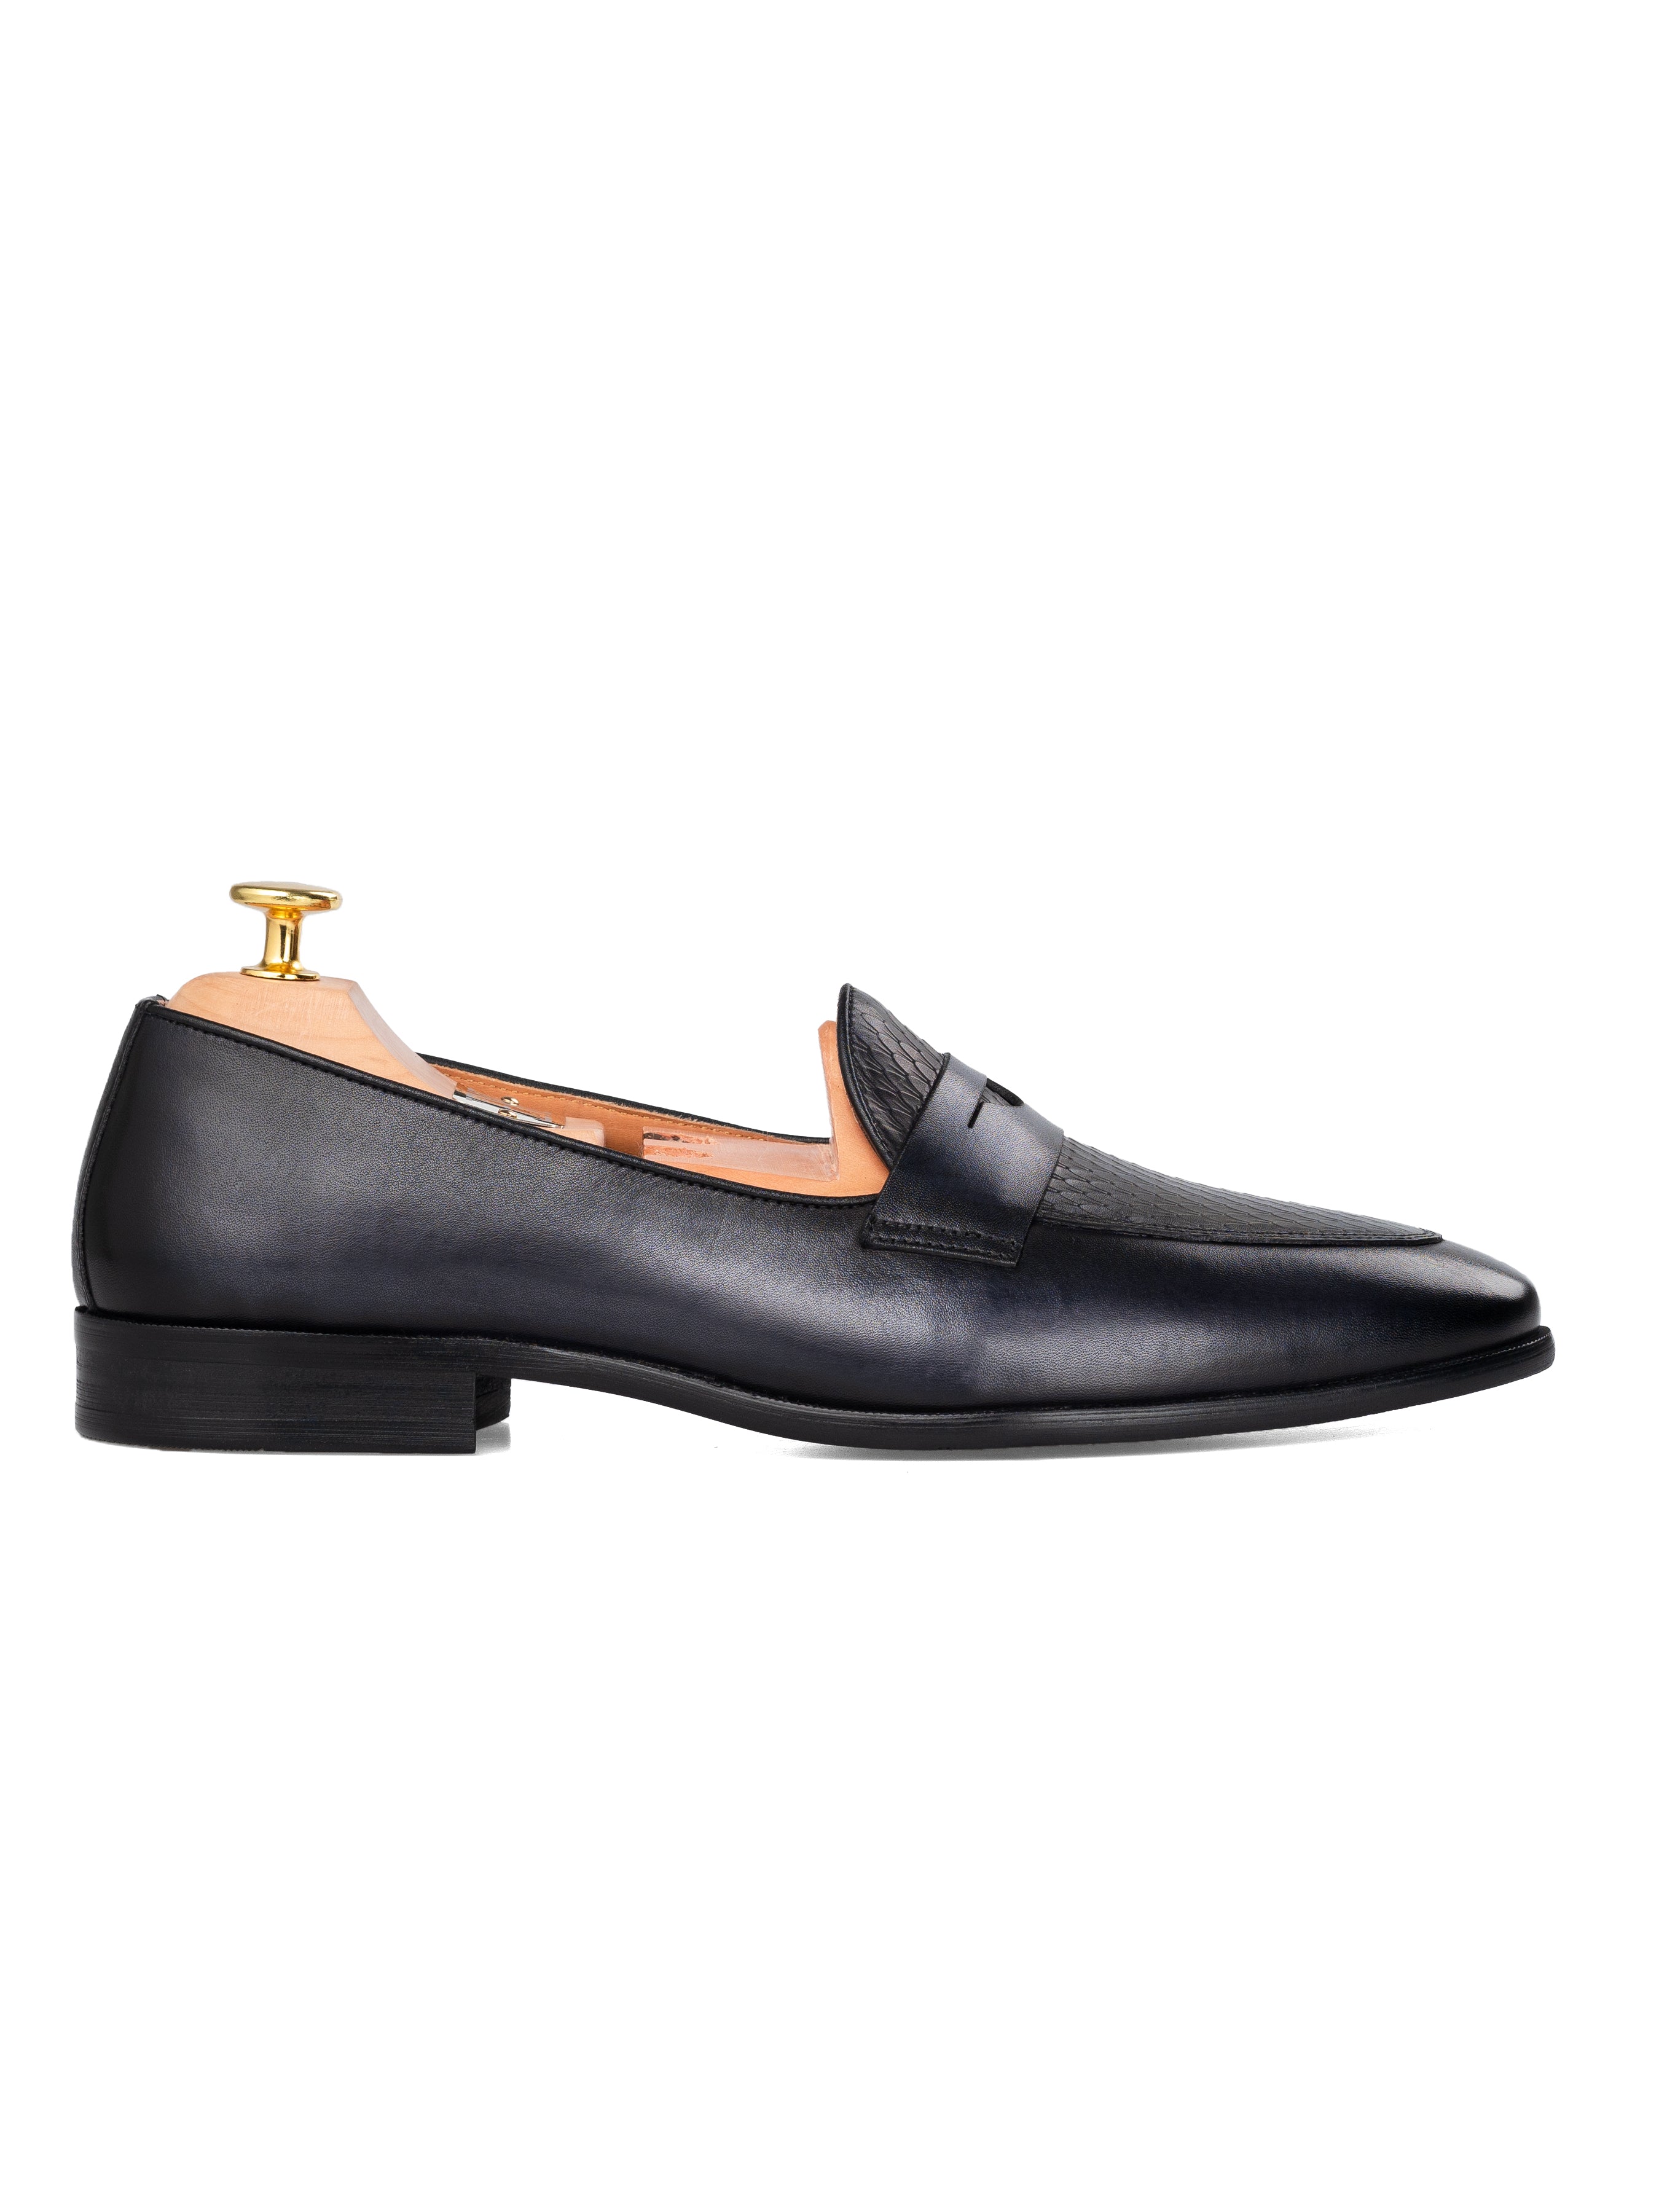 Enzo Belgian Loafer - Black Grey (Hand Painted Patina)